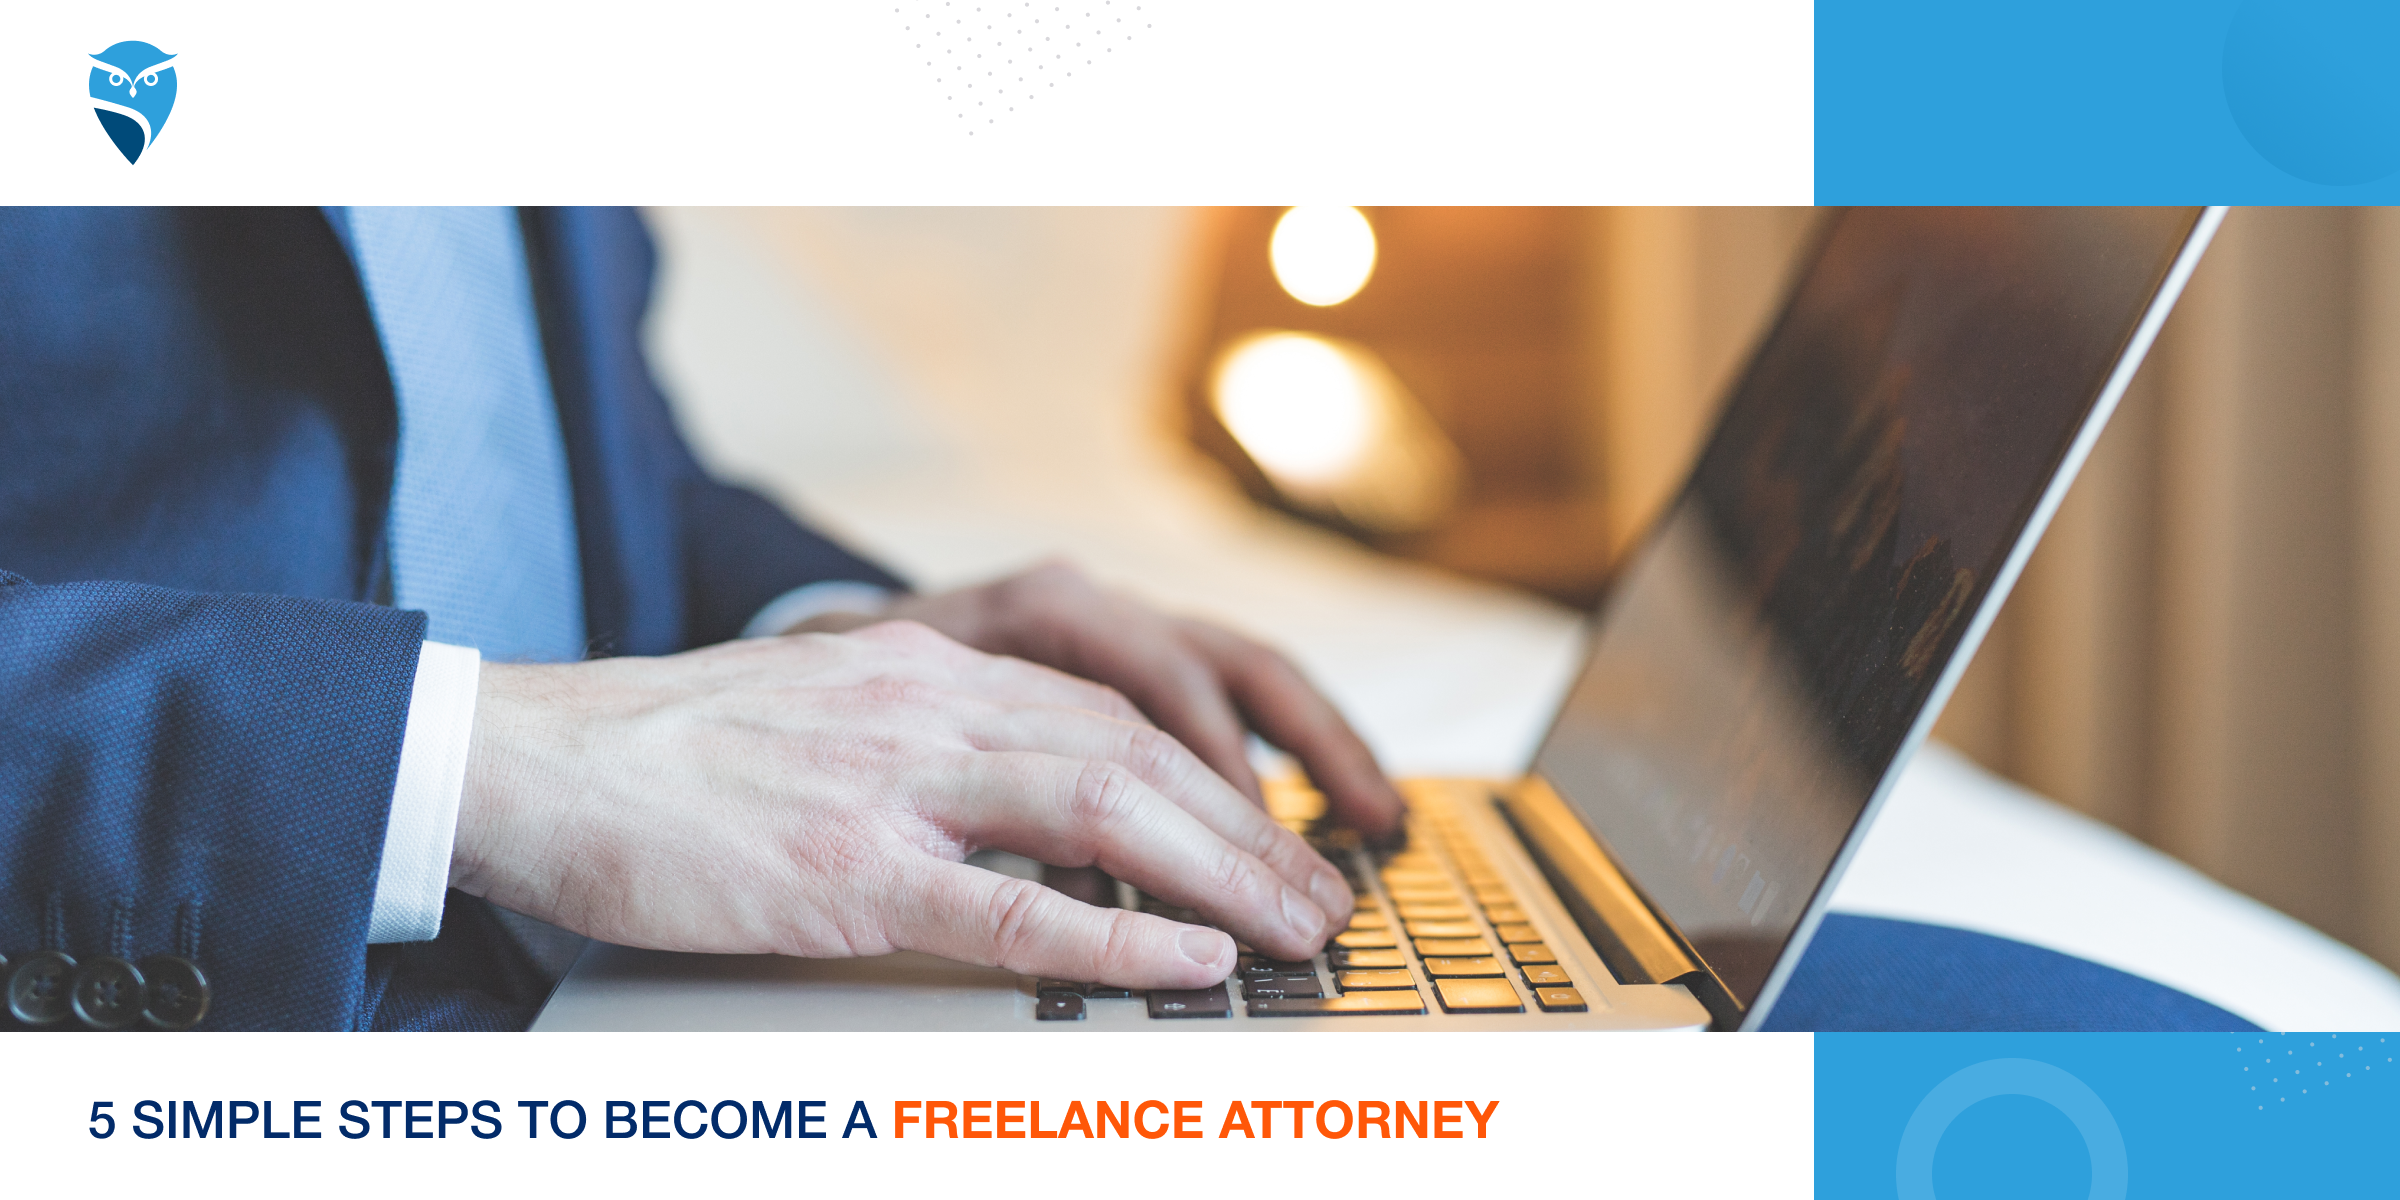 5 Simple Steps to Become a Freelance Attorney